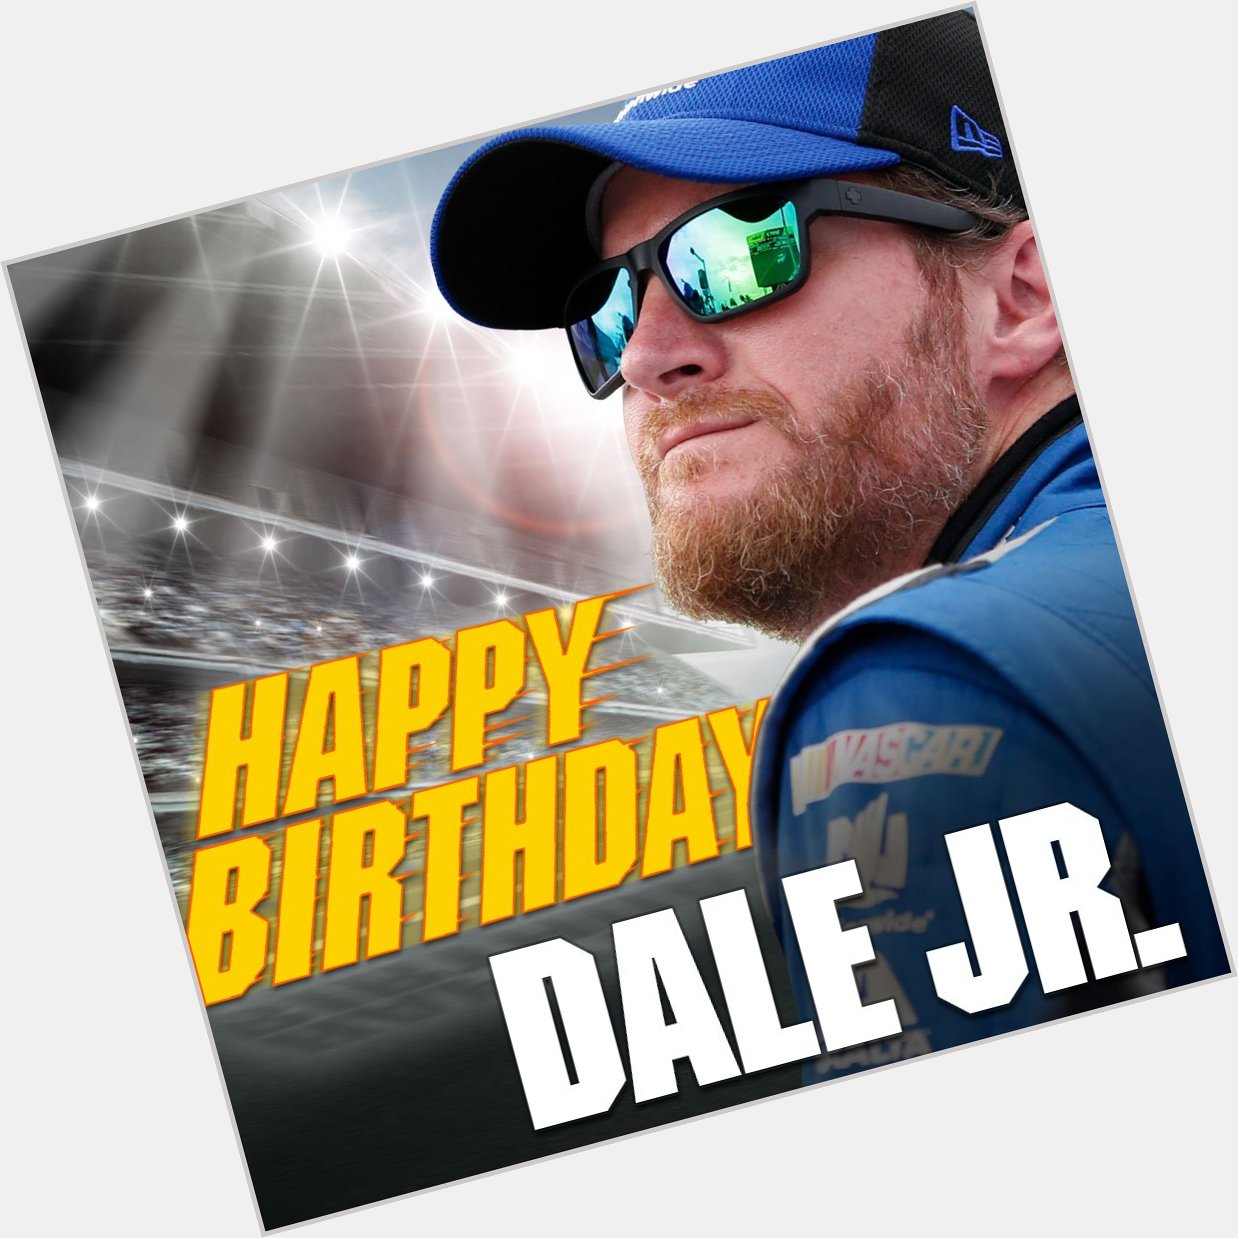 Whether you think of him as Number 8 or Number 88, he turns 45 today. Happy birthday, Dale Earnhardt Jr.! 